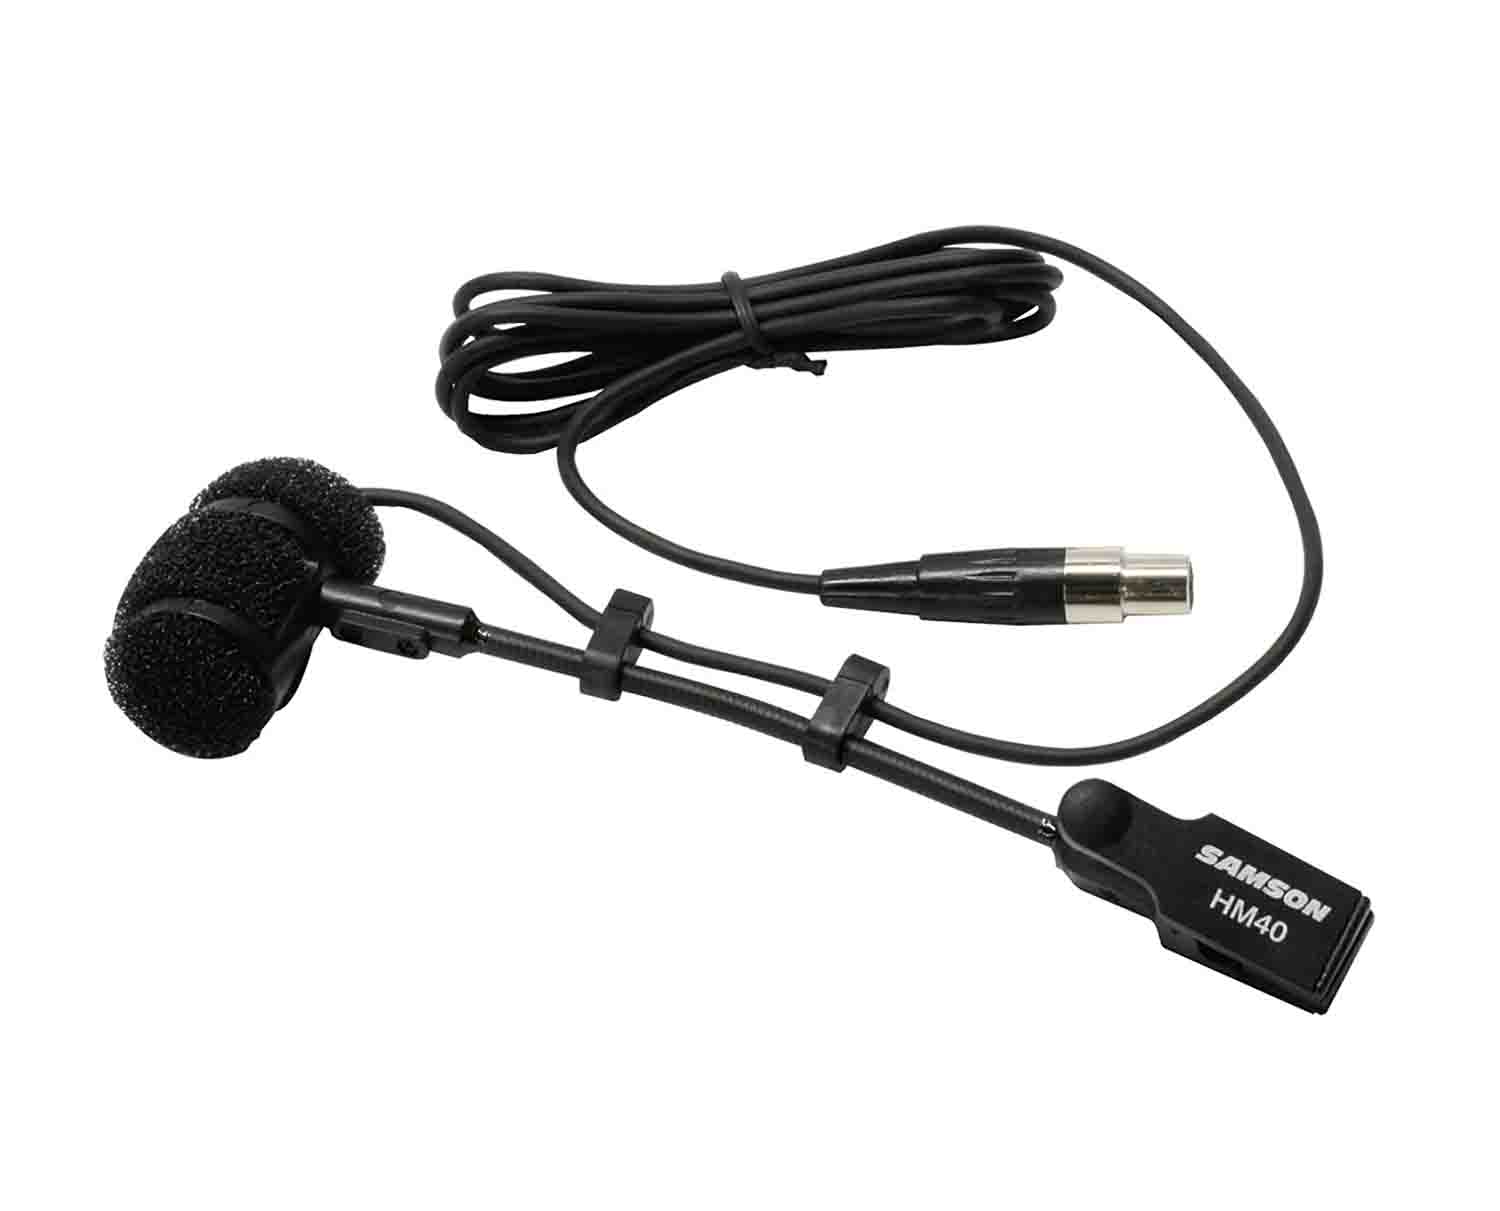 Samson SWA3W4, HM40 Wind Instrument Microphone with P3 Connector - Hollywood DJ